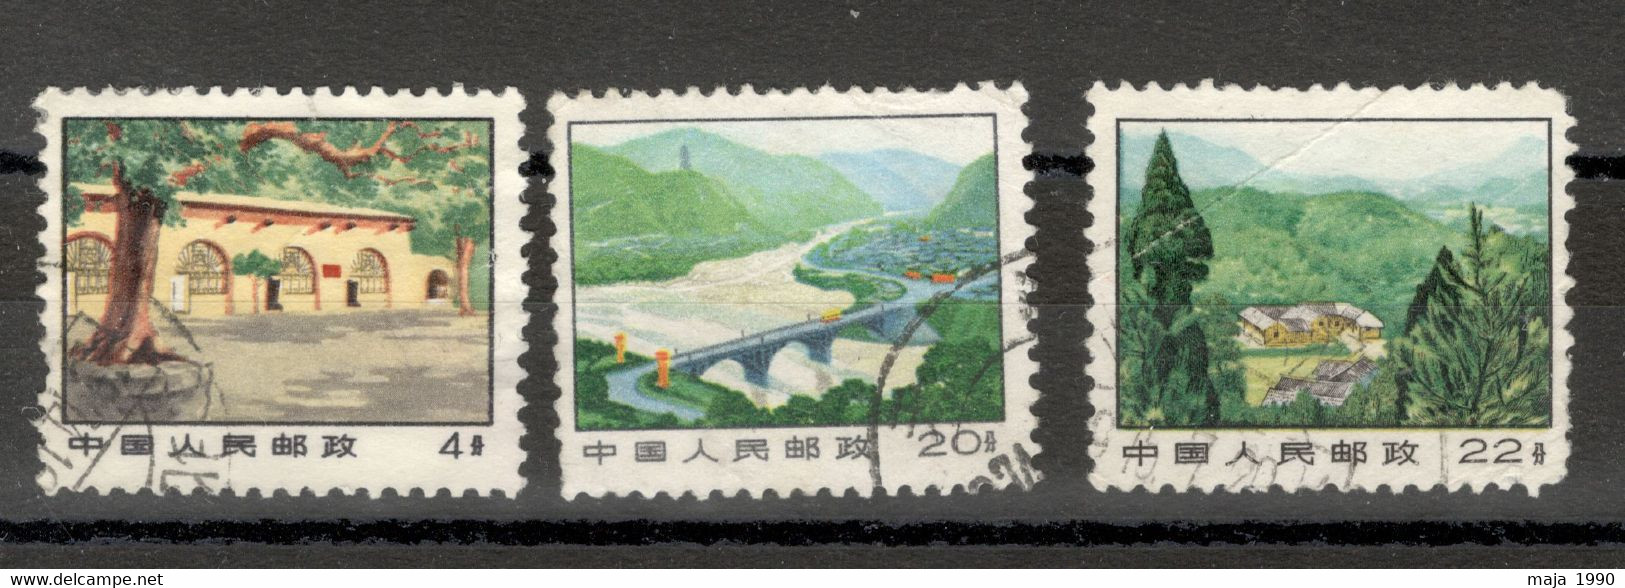 CHINA  - 3 USED STAMPS - REVOLUTIONARY SITES - 1971. - Gebraucht